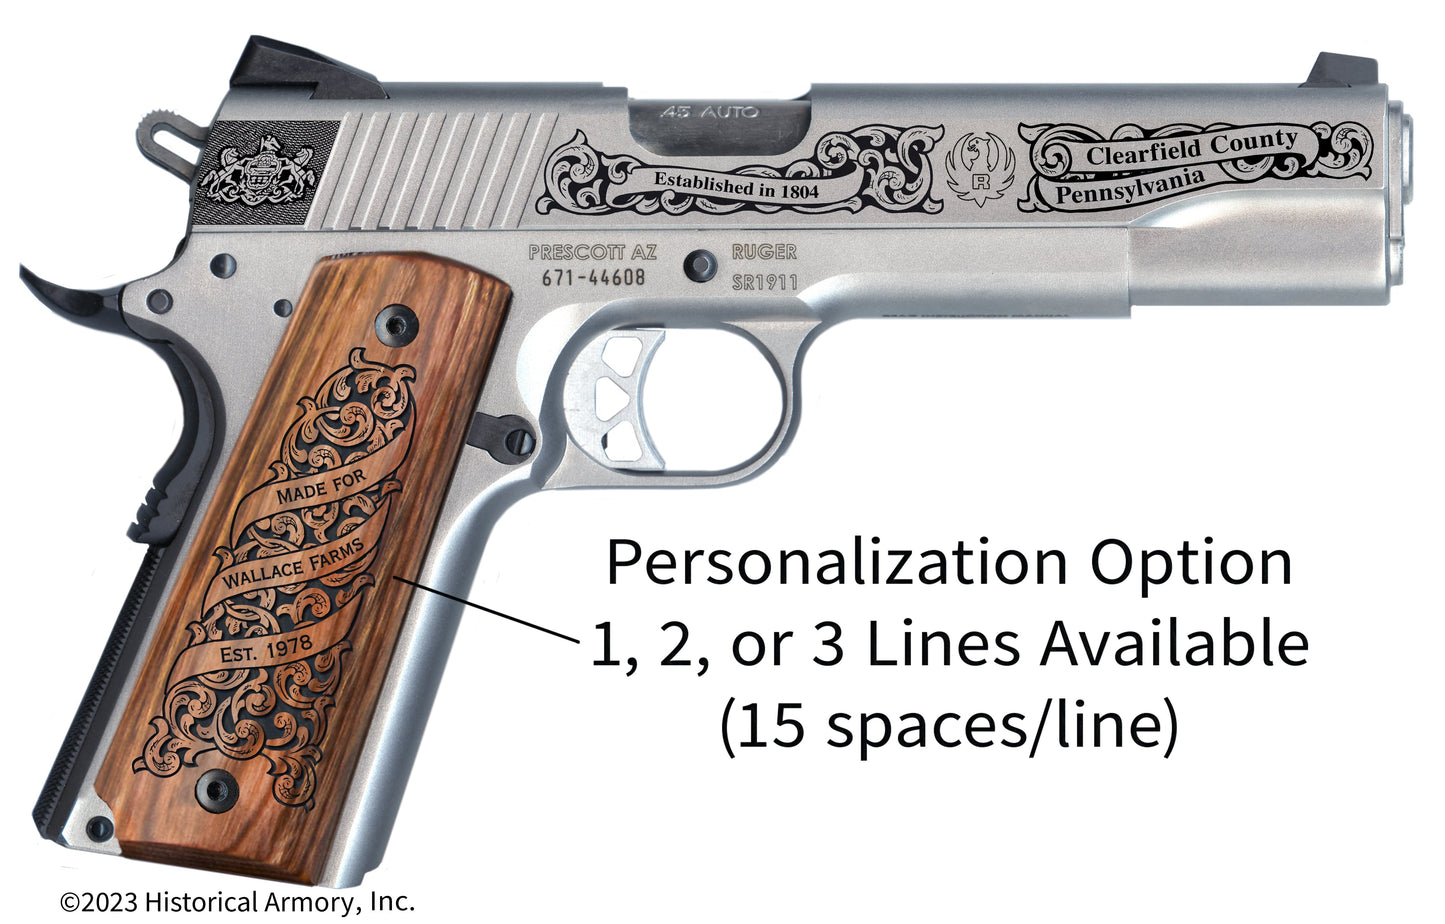 Clearfield County Pennsylvania Personalized Engraved .45 Auto Ruger 1911